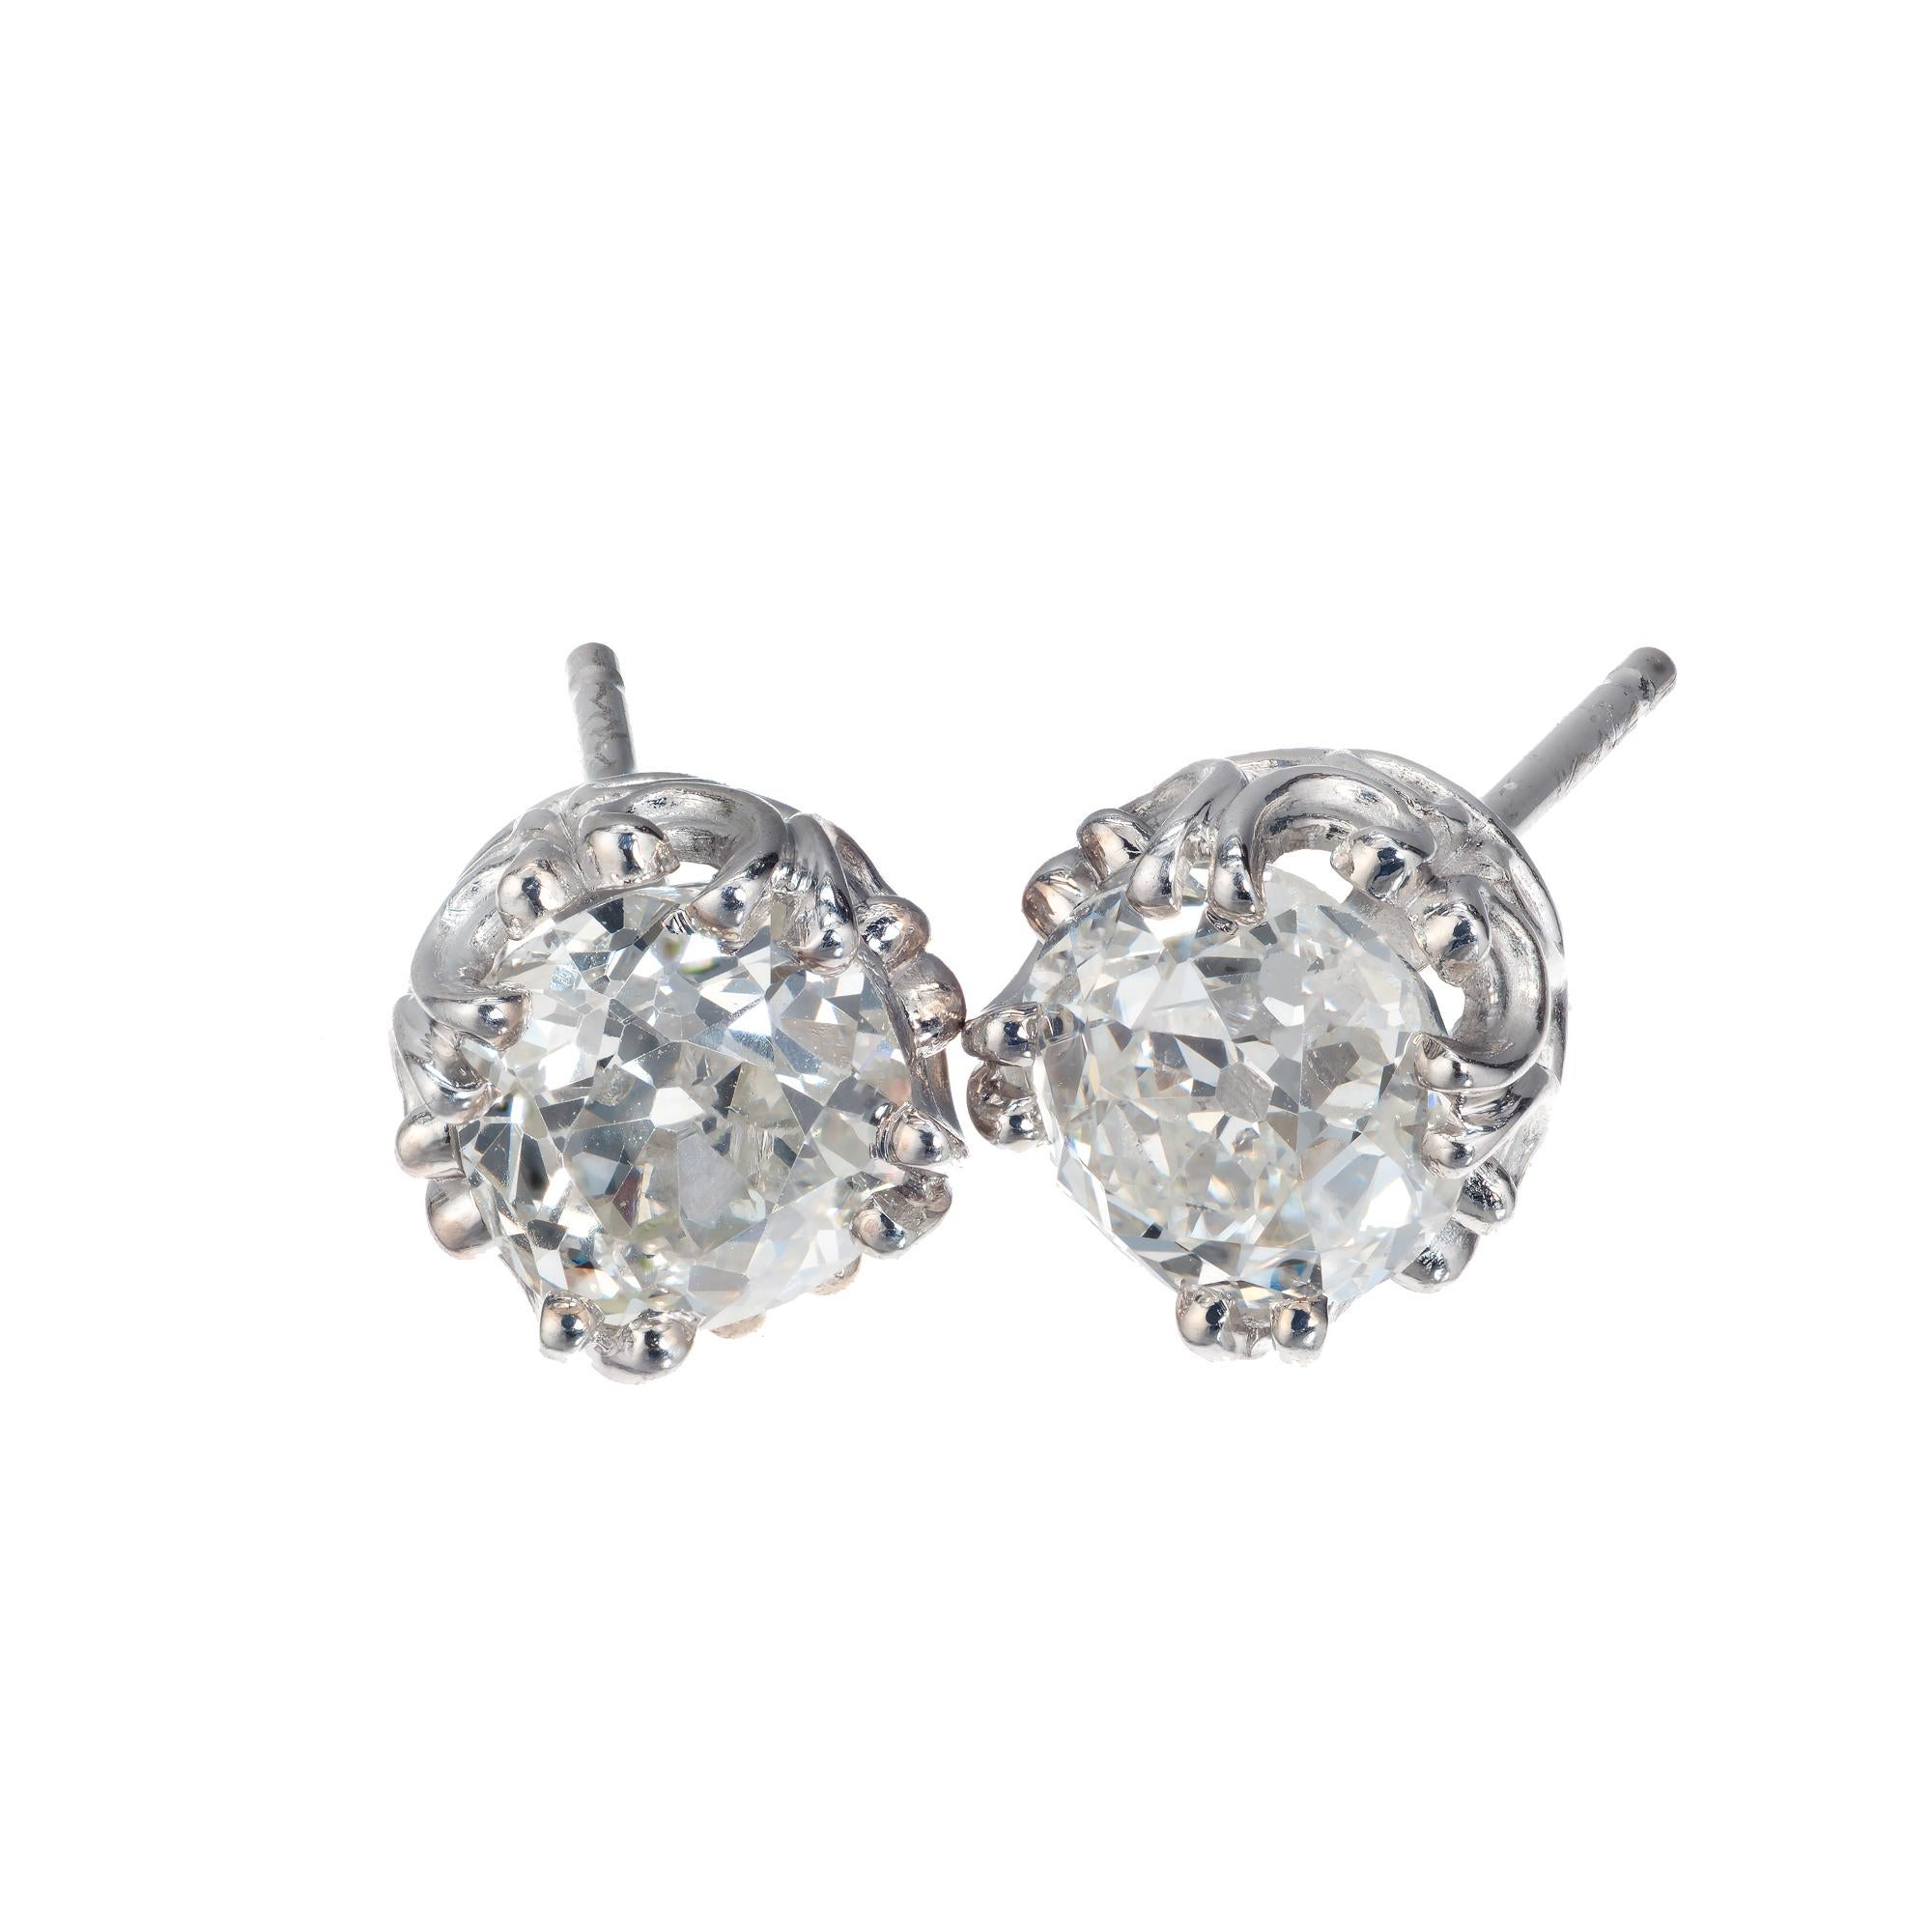 Peter Suchy old mine cut diamond stud earrings with two bright white sparkly estate diamonds in a filigree antique setting.

1 old mine cut K VS diamond, Approximate .82cts GIA Certificate # 1192681402
1 old mine cut I SI diamond, Approximate .98cts